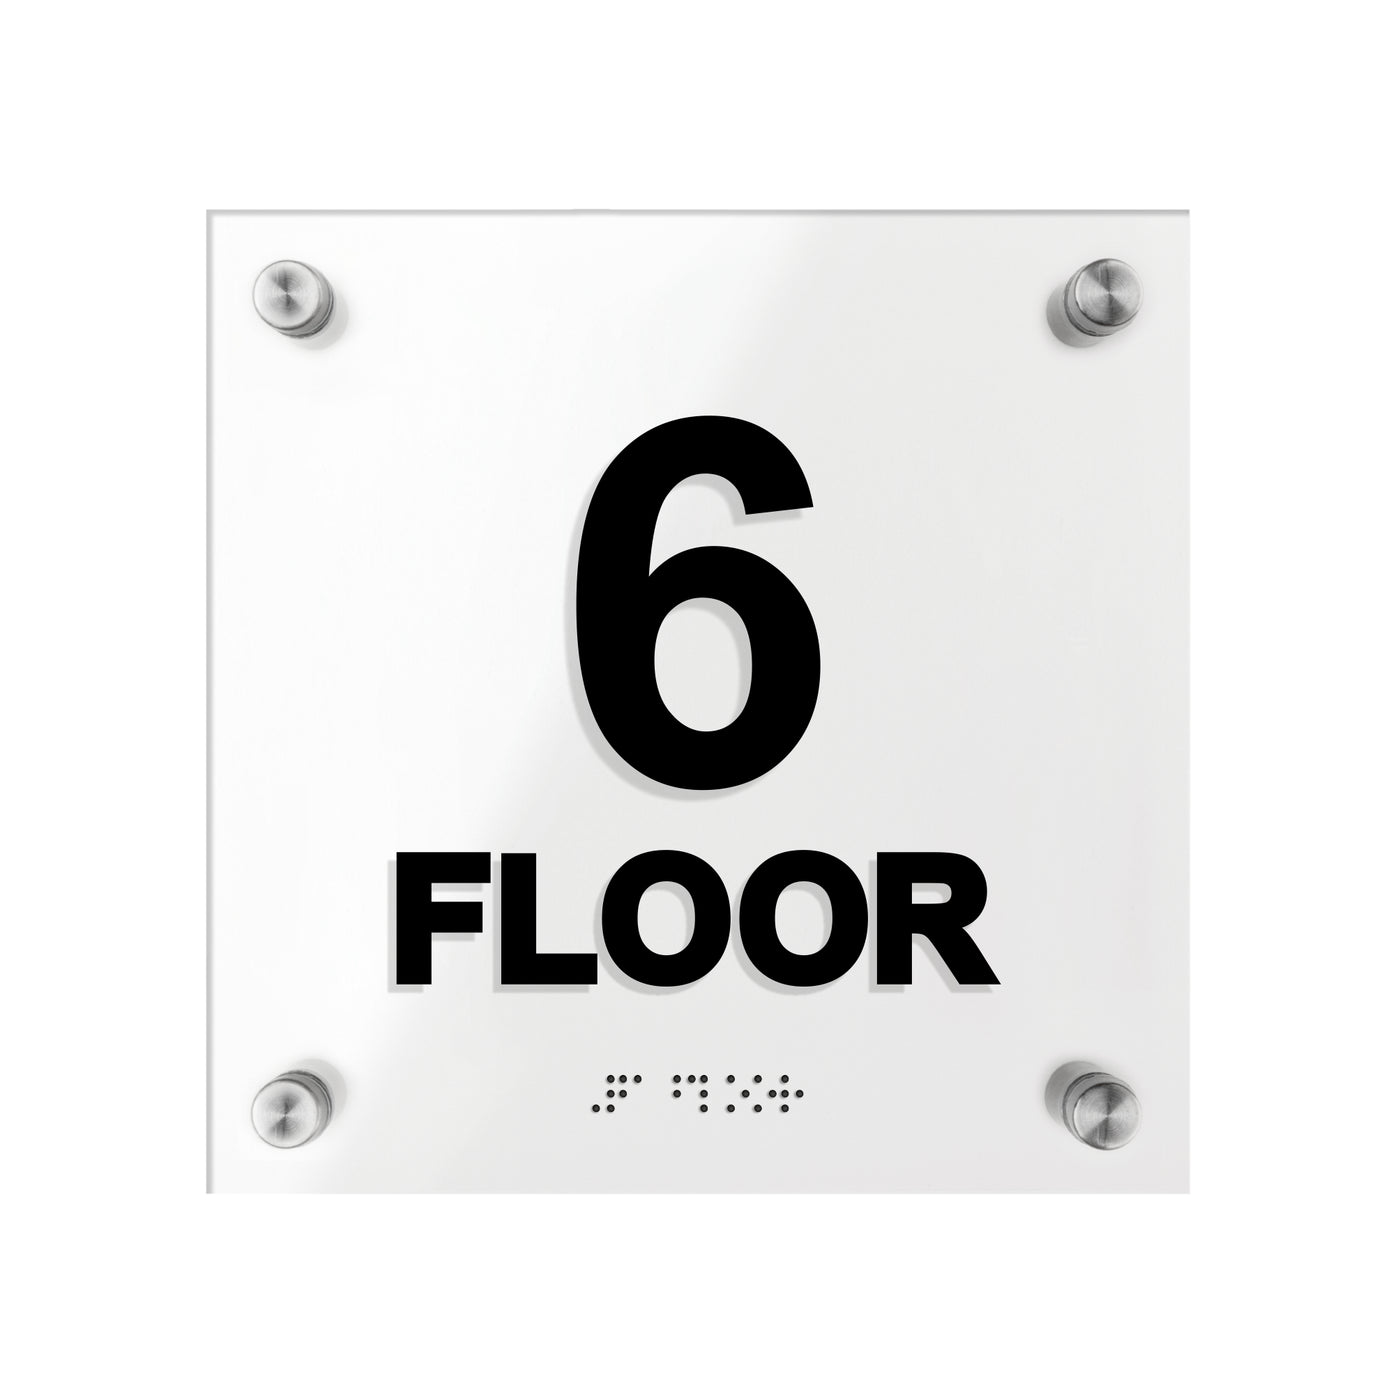 Floor Signs - Acrylic 6ft Floor Sign With Braille - "Classic" Design